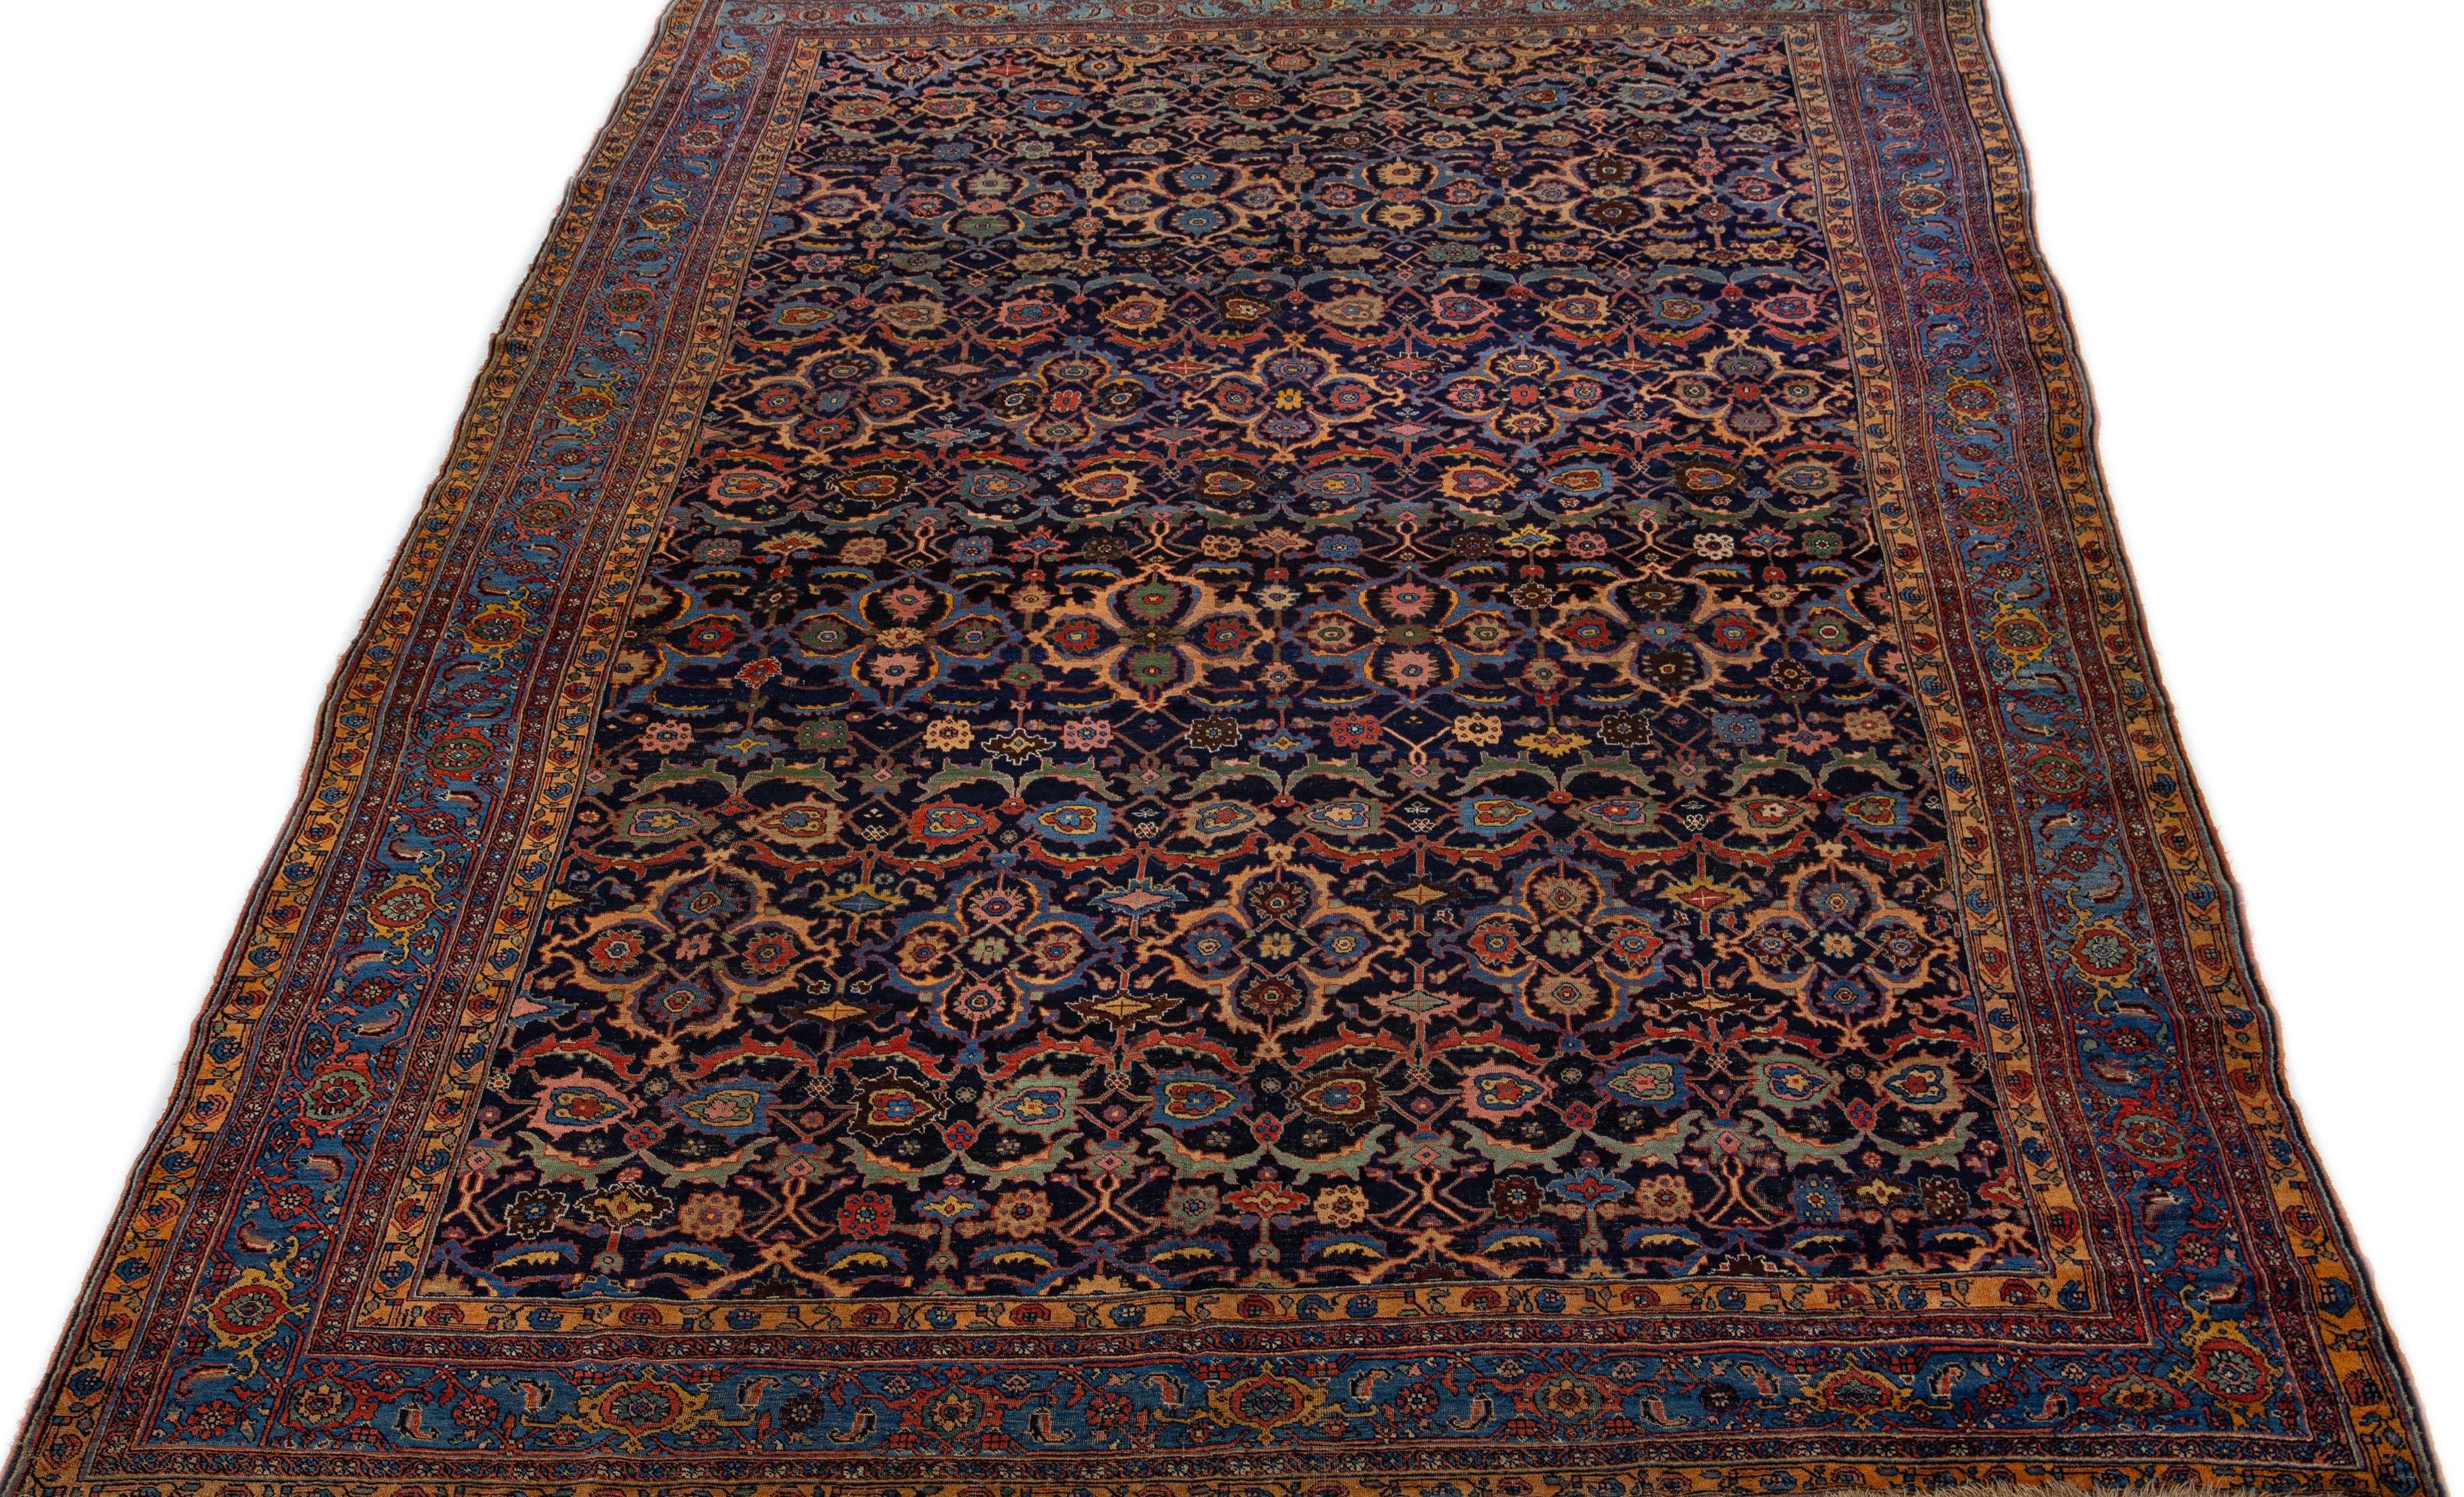 This stunning Bidjar wool rug showcases a dark blue color field, featuring an exquisite traditional floral design with rust, green, and yellow accents. The piece is crafted with great attention to detail, portraying the fine craftsmanship of Persian